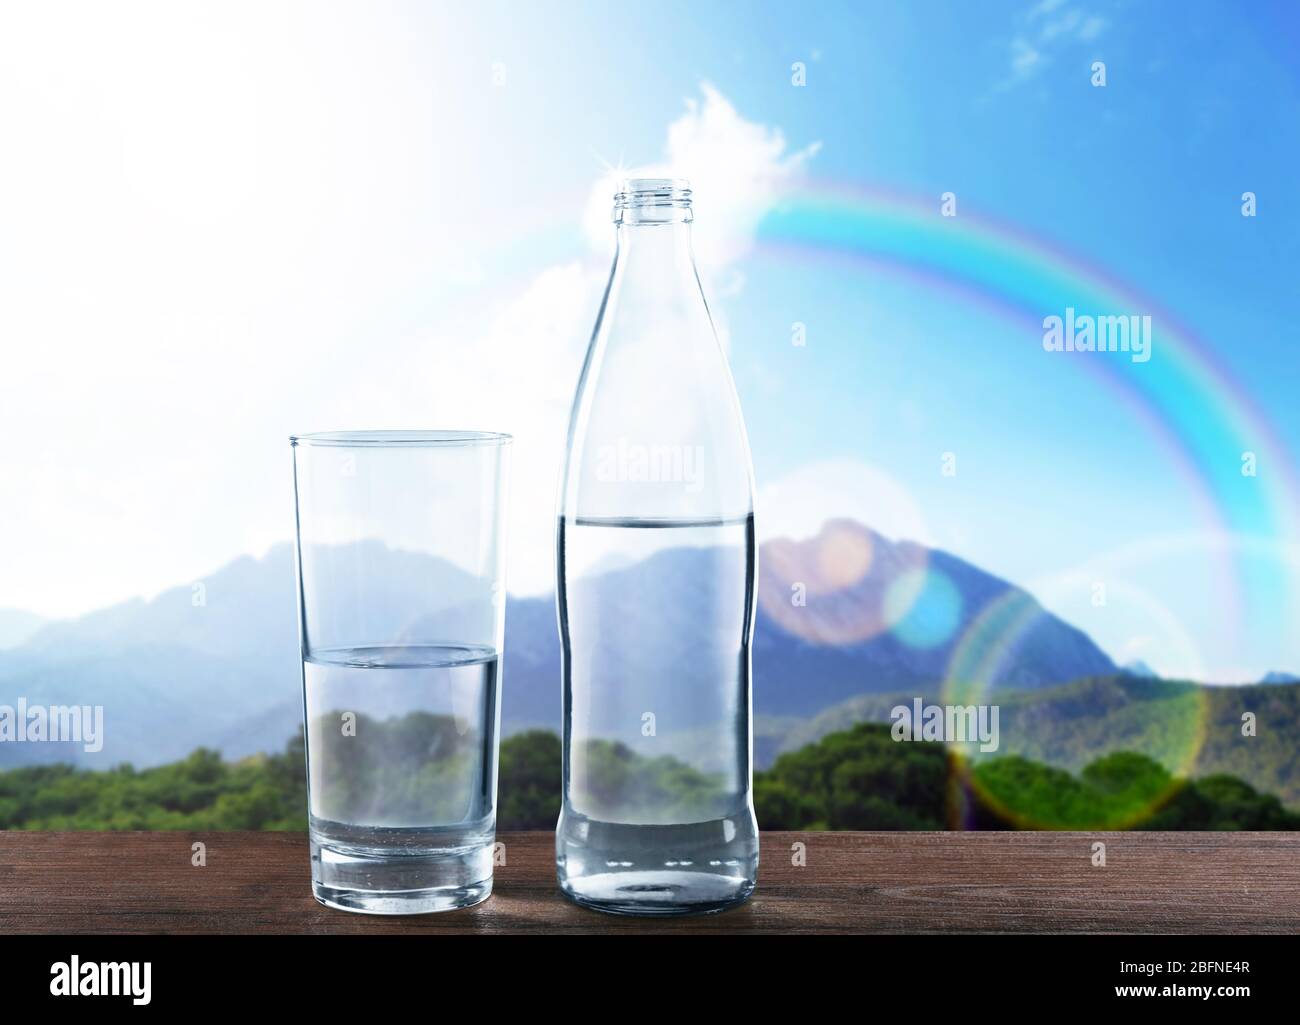 Bottle and glass of clear water on wooden table against nature background Stock Photo